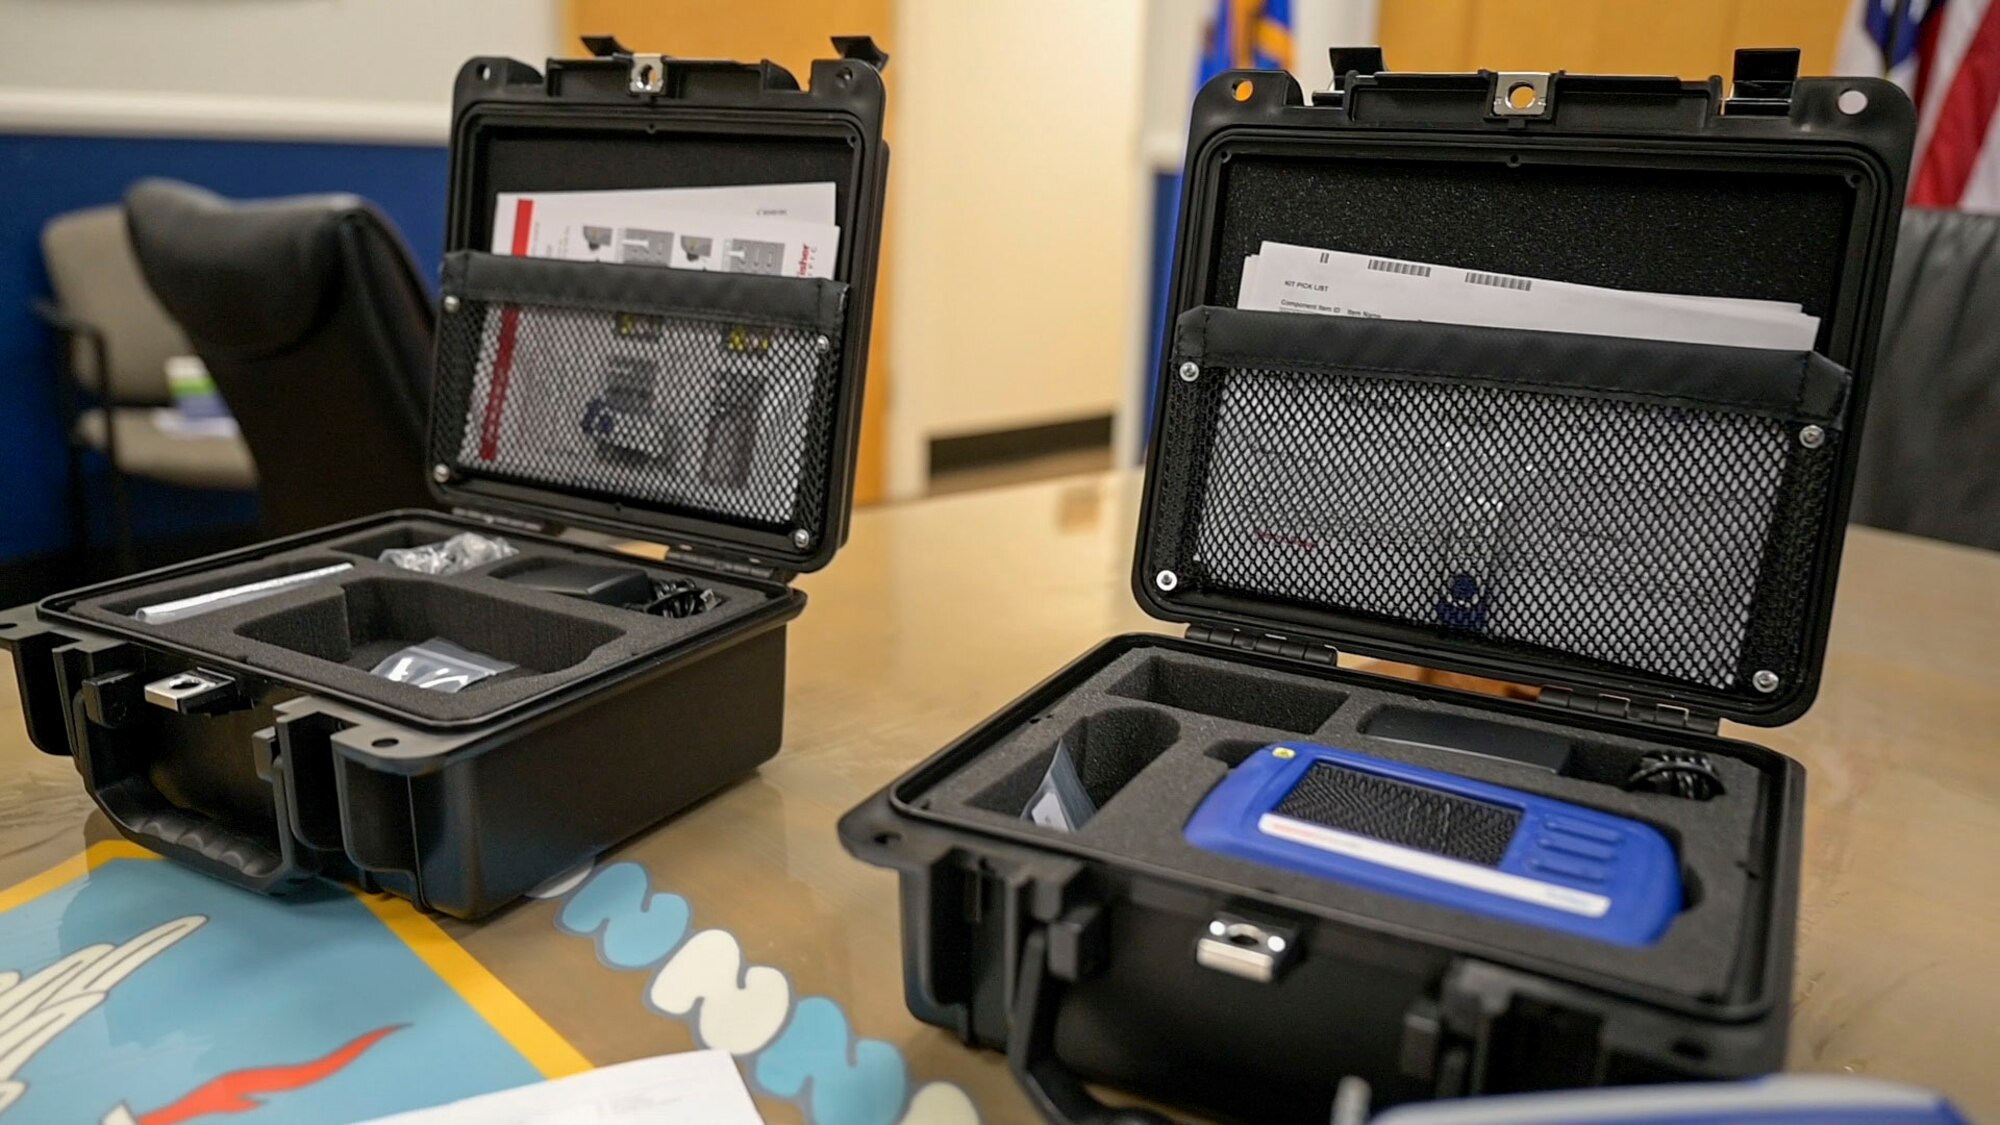 TruNarc laser drug testing devices allow for
identifying narcotics and opioid derivatives out in the field in a safe and effective manner for AFOSI agents.